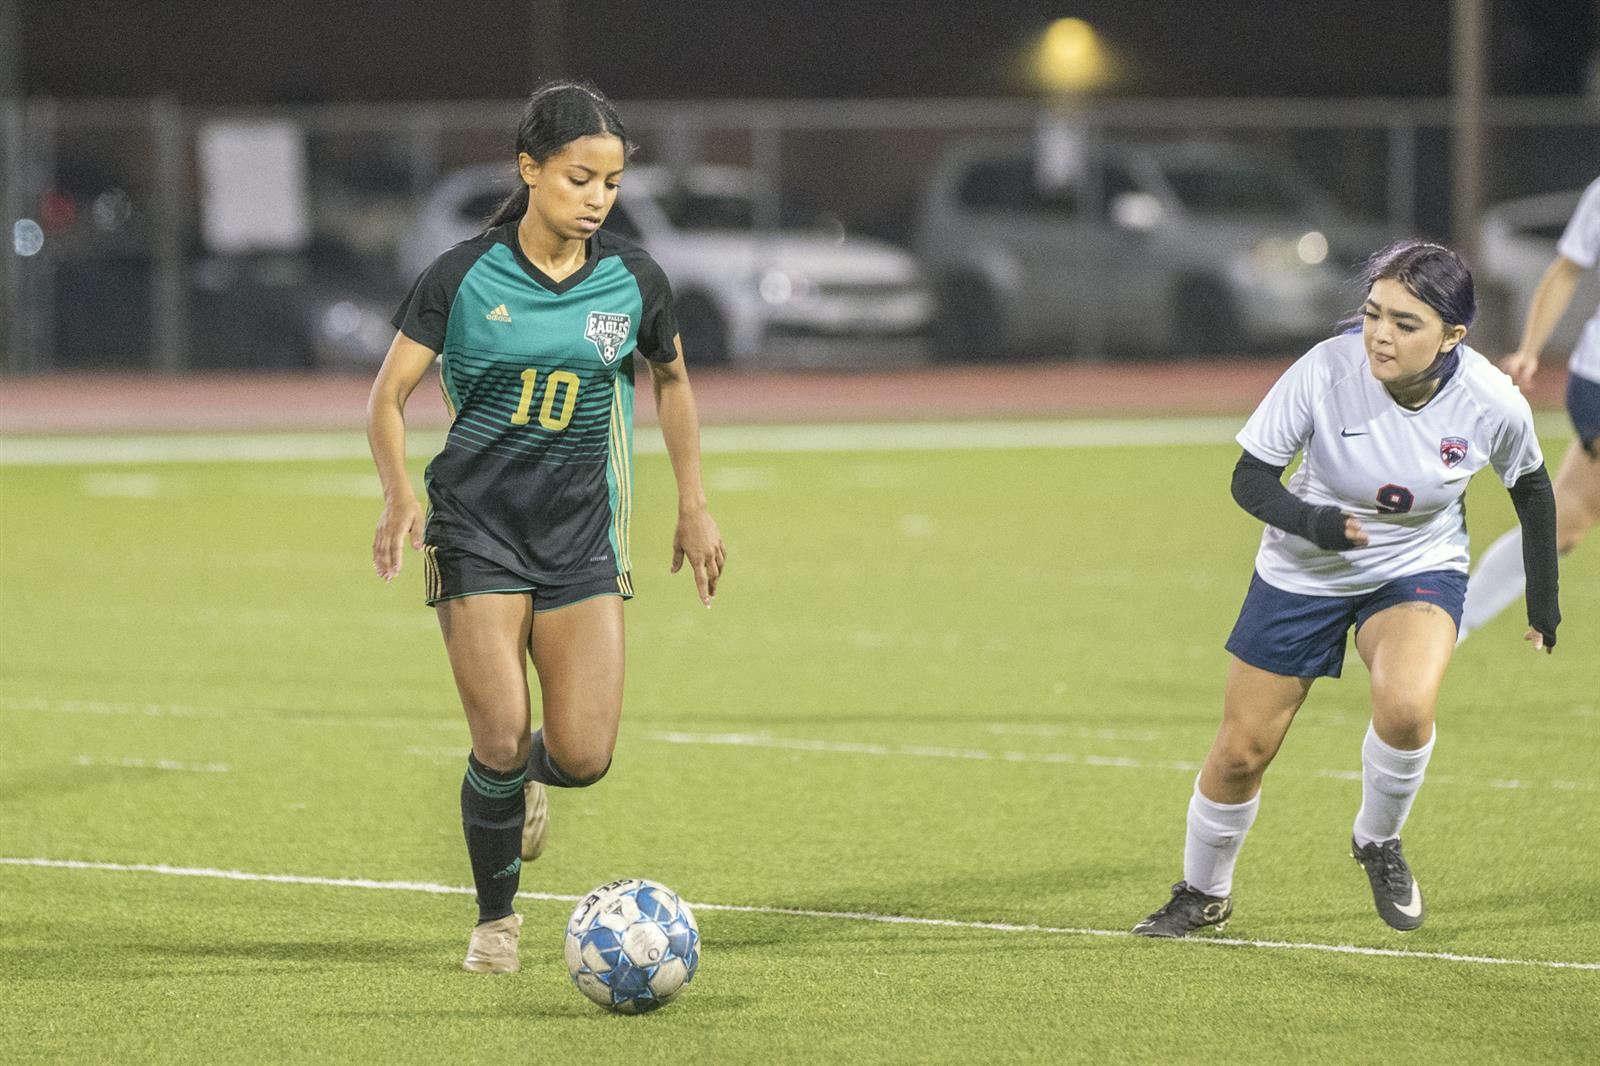  CFISD soccer players earn 2022 District 16-6A All-District honors.